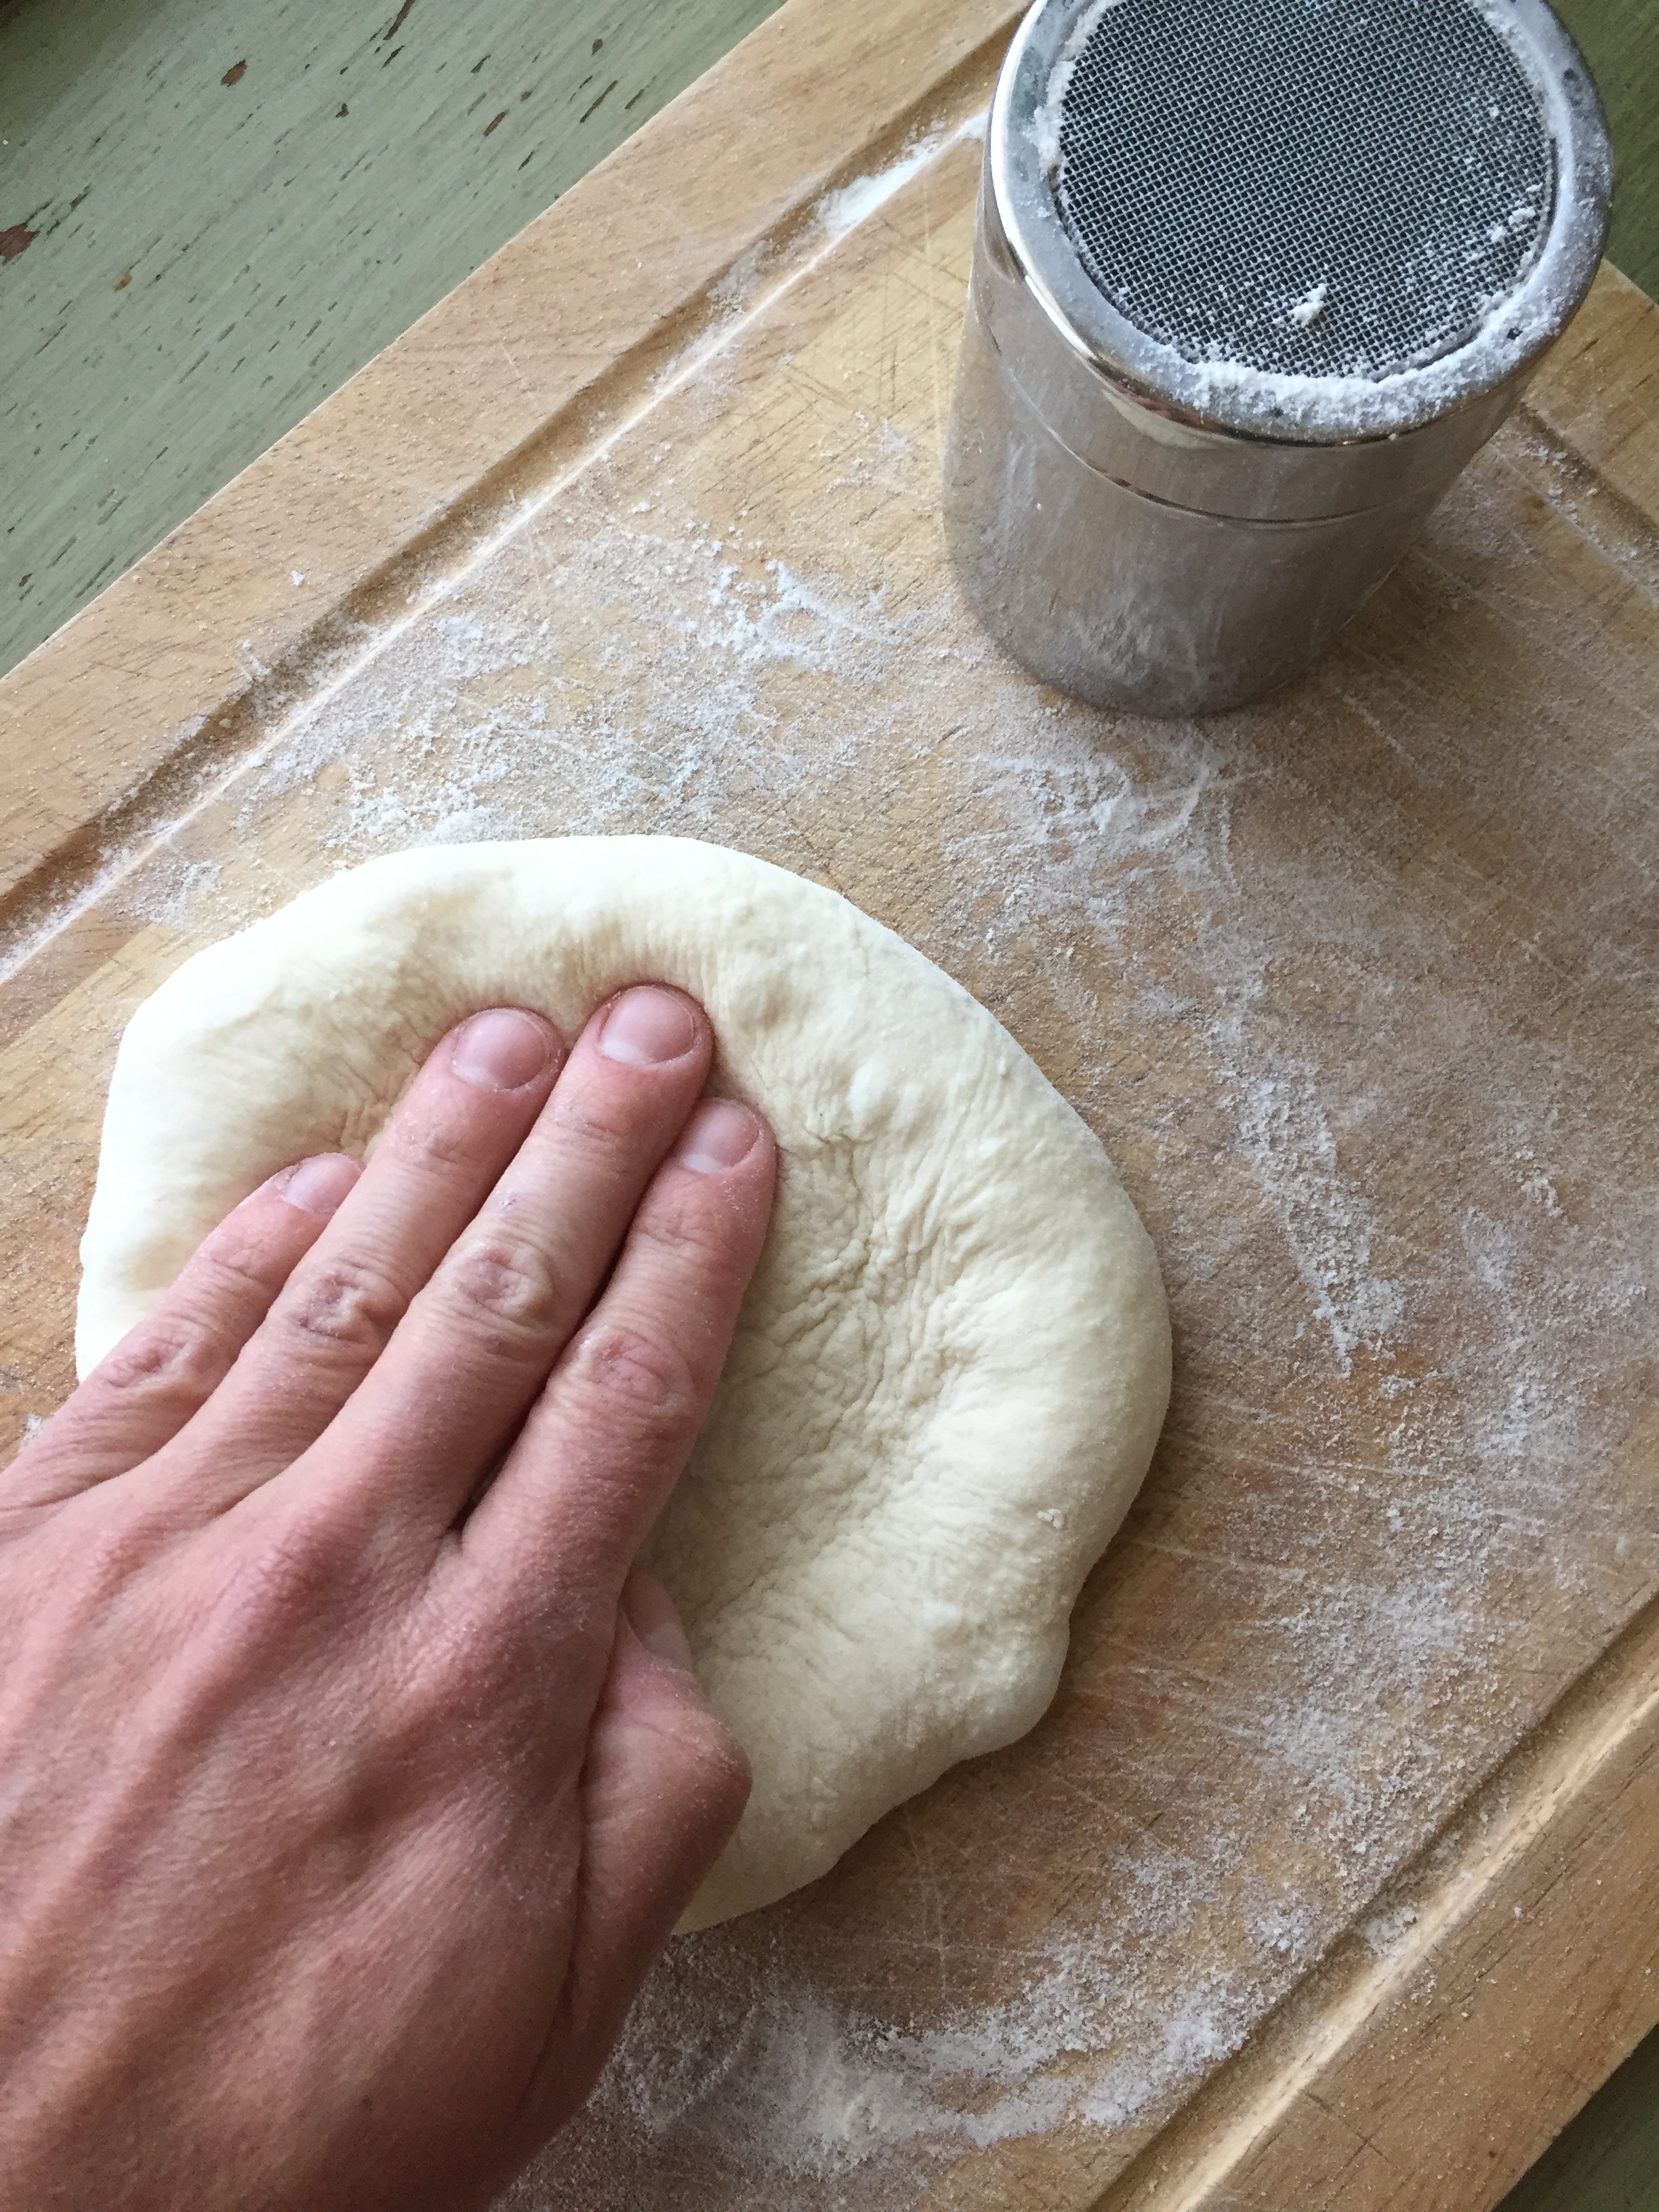  To shape your dough, start by pressing your fingers down around the edge to create the crust.  